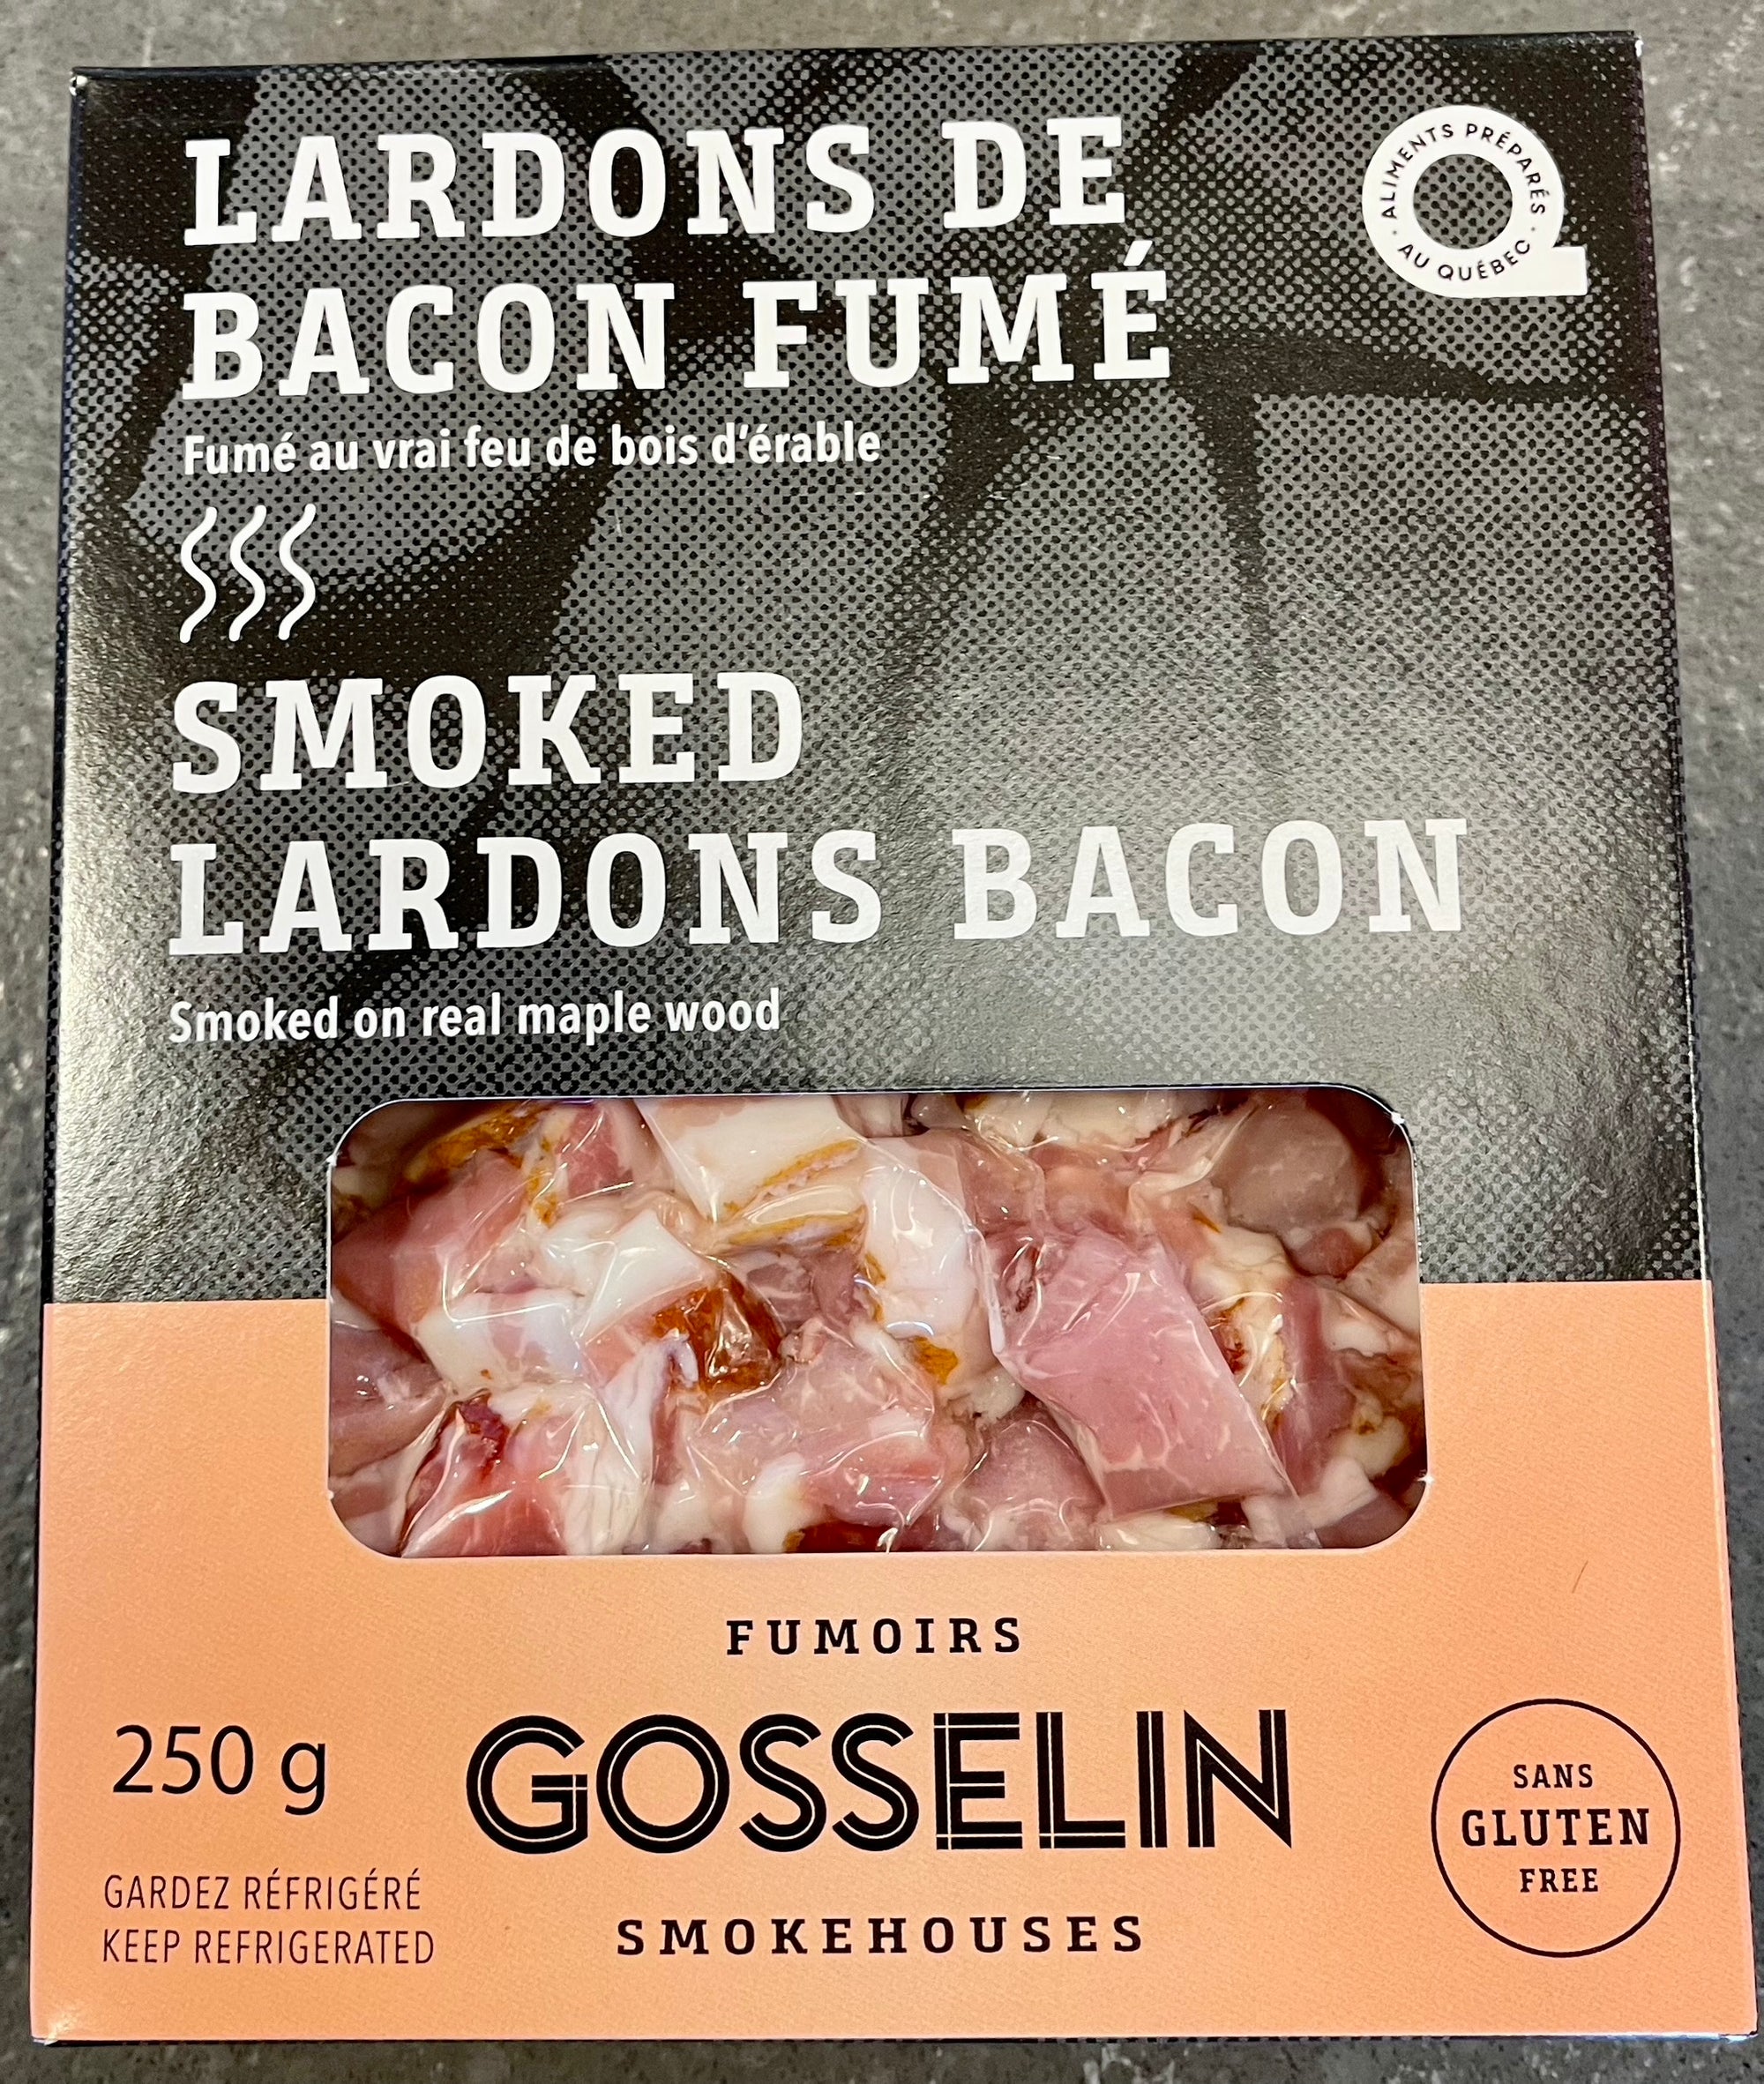 Landrons Bacon Smoked on Real Maplewood by Fumoirs Gosselin 250g (Frozen)